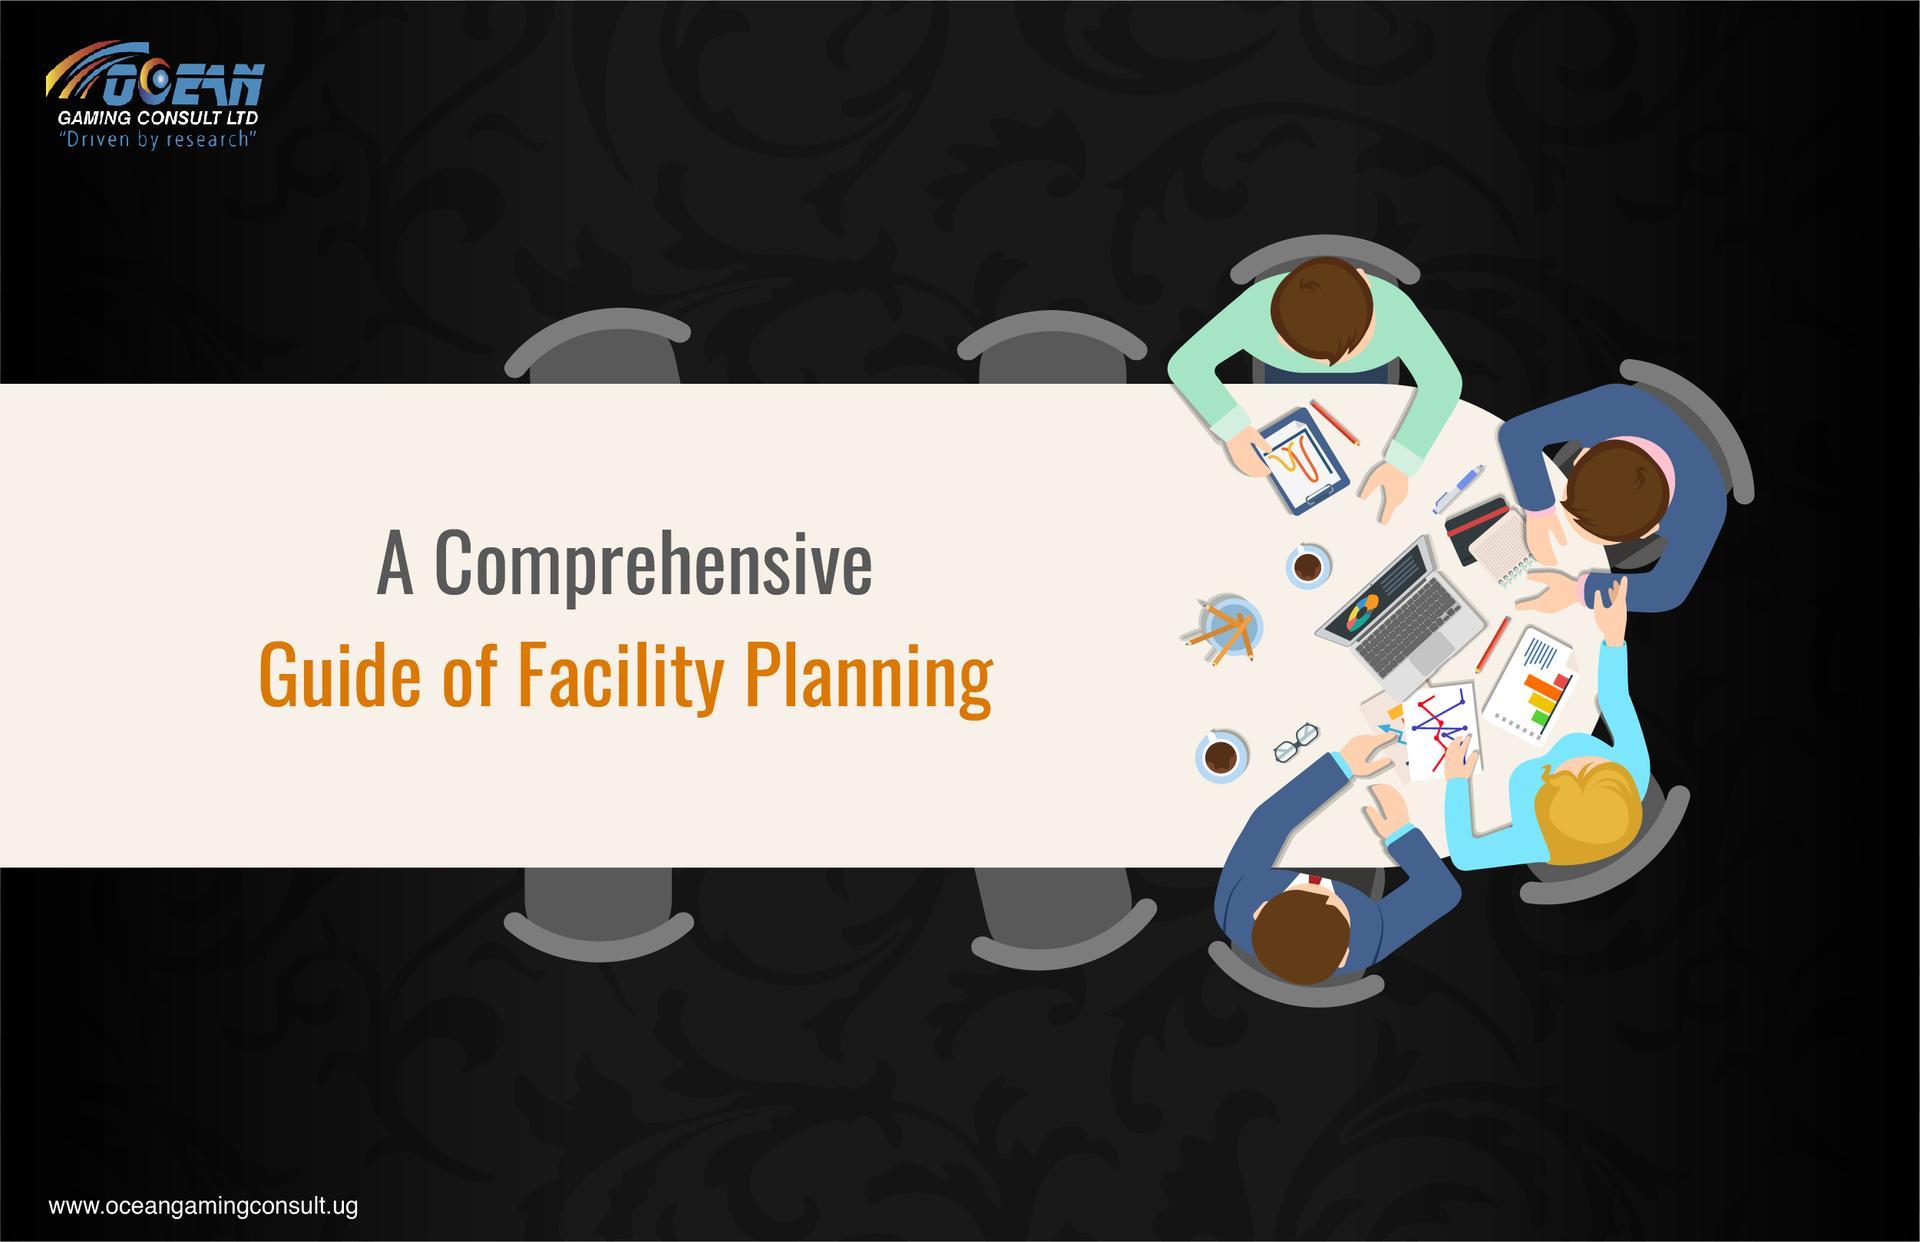 A Comprehensive Guide of Facility Planning